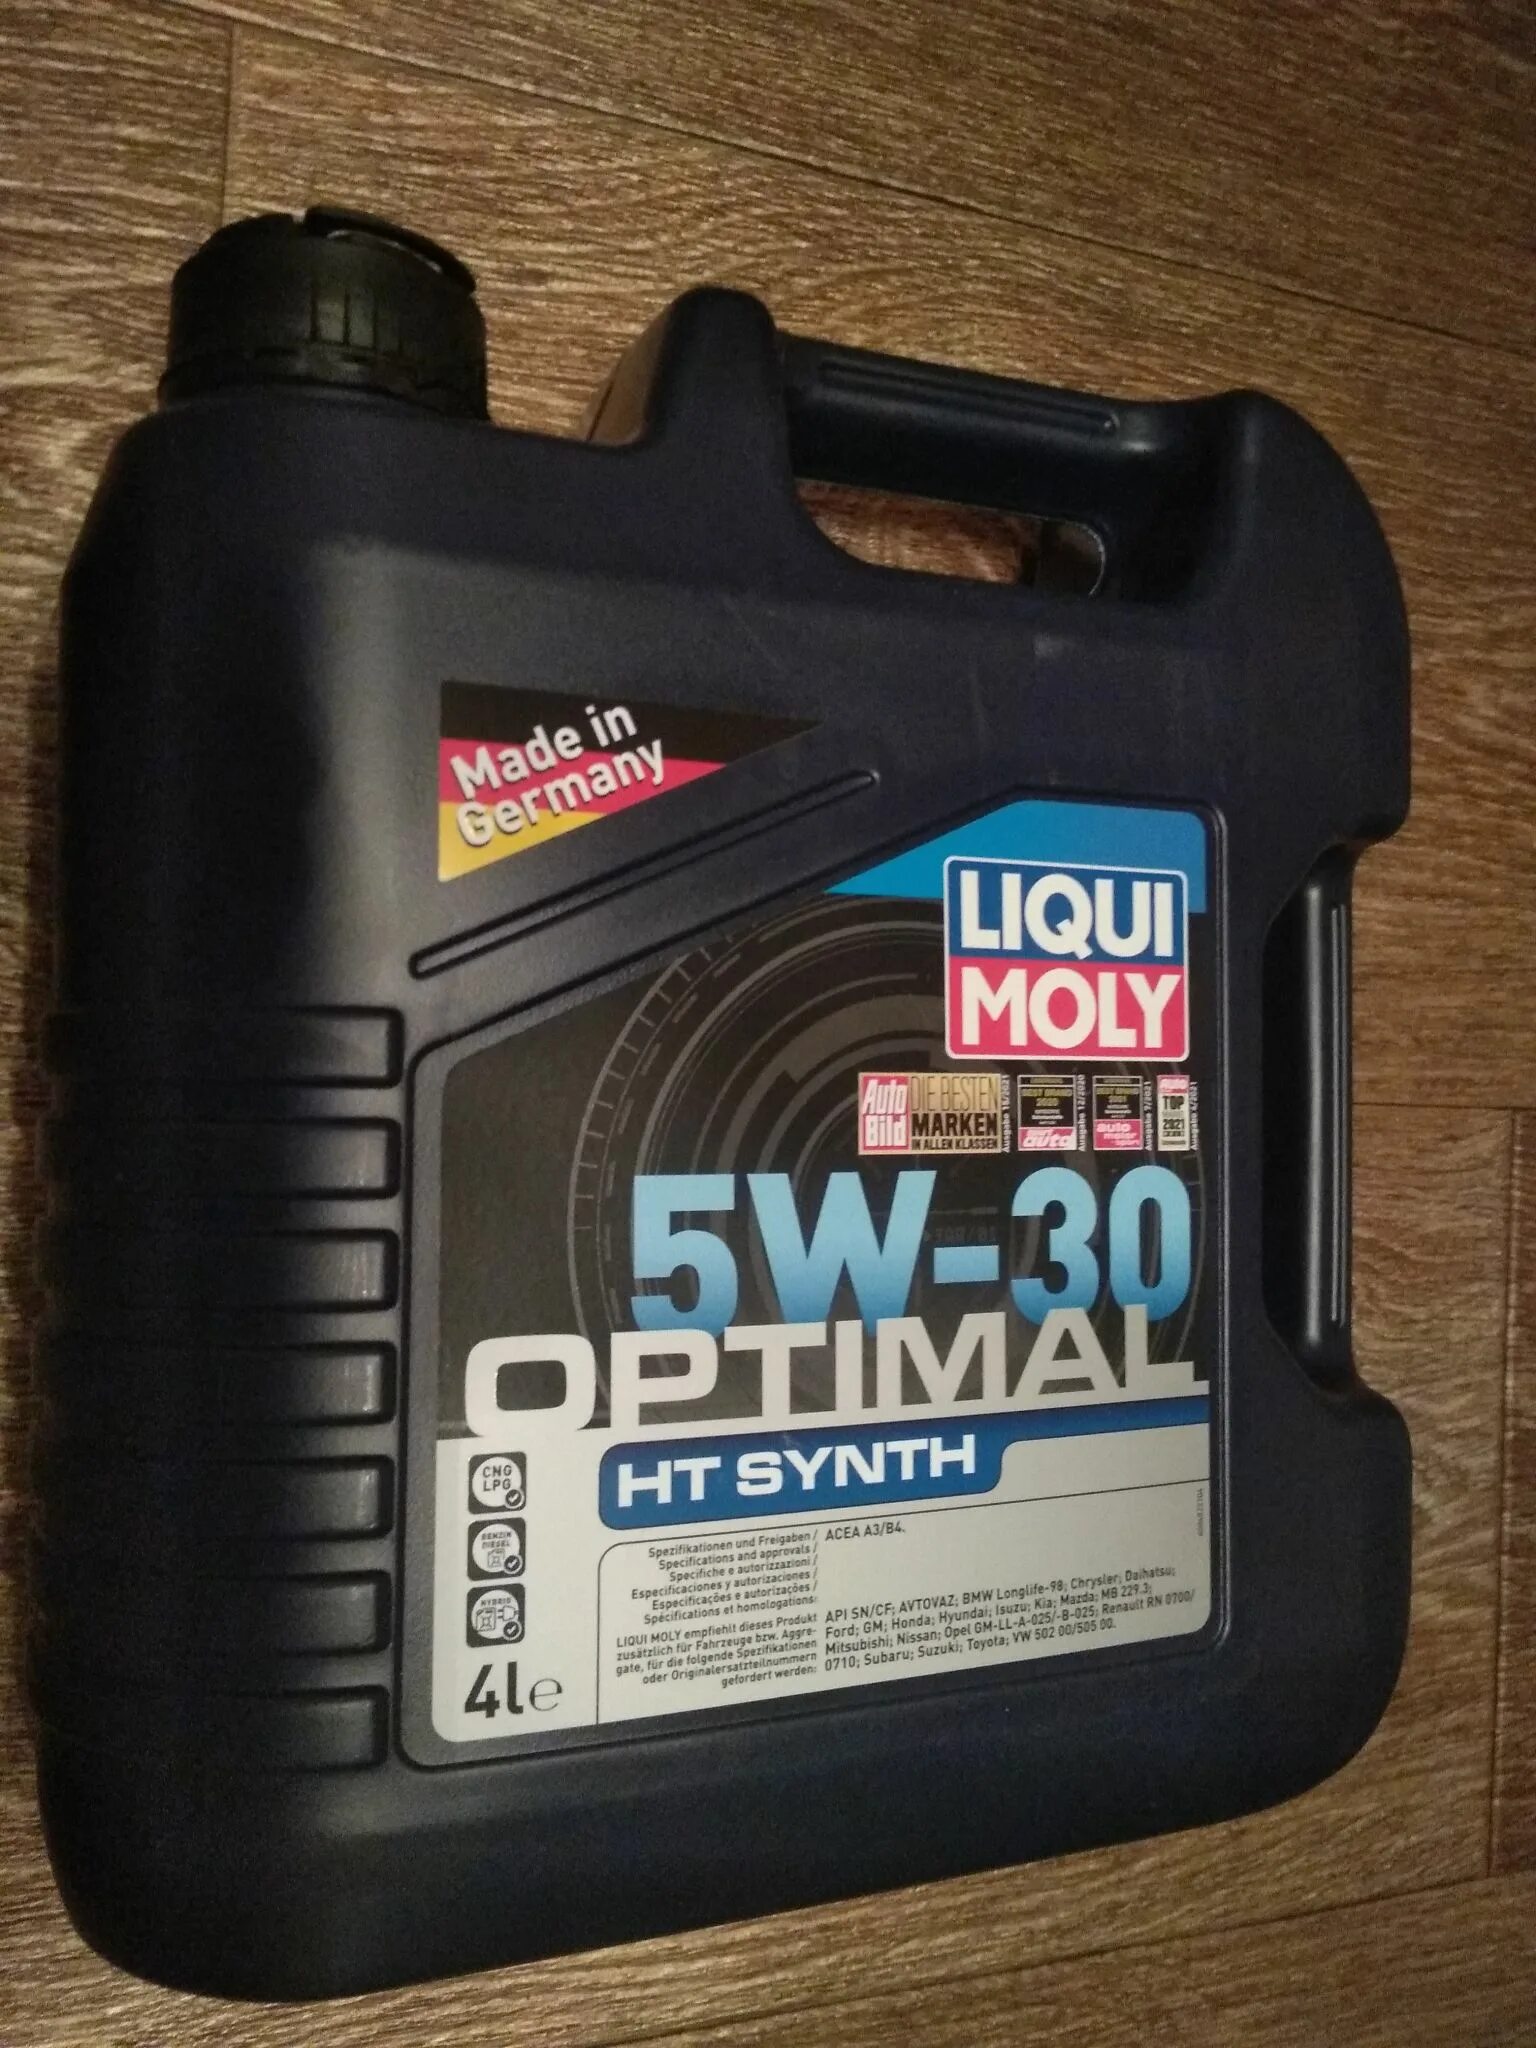 Масло synth 5w30. Liqui Moly 5w30 OPTIMAL Synth. Масло Liqui Moly 5w30 OPTIMAL HT Synth. OPTIMAL Synth 5w-30. Ликви моли OPTIMAL HT Synth 5w-30.